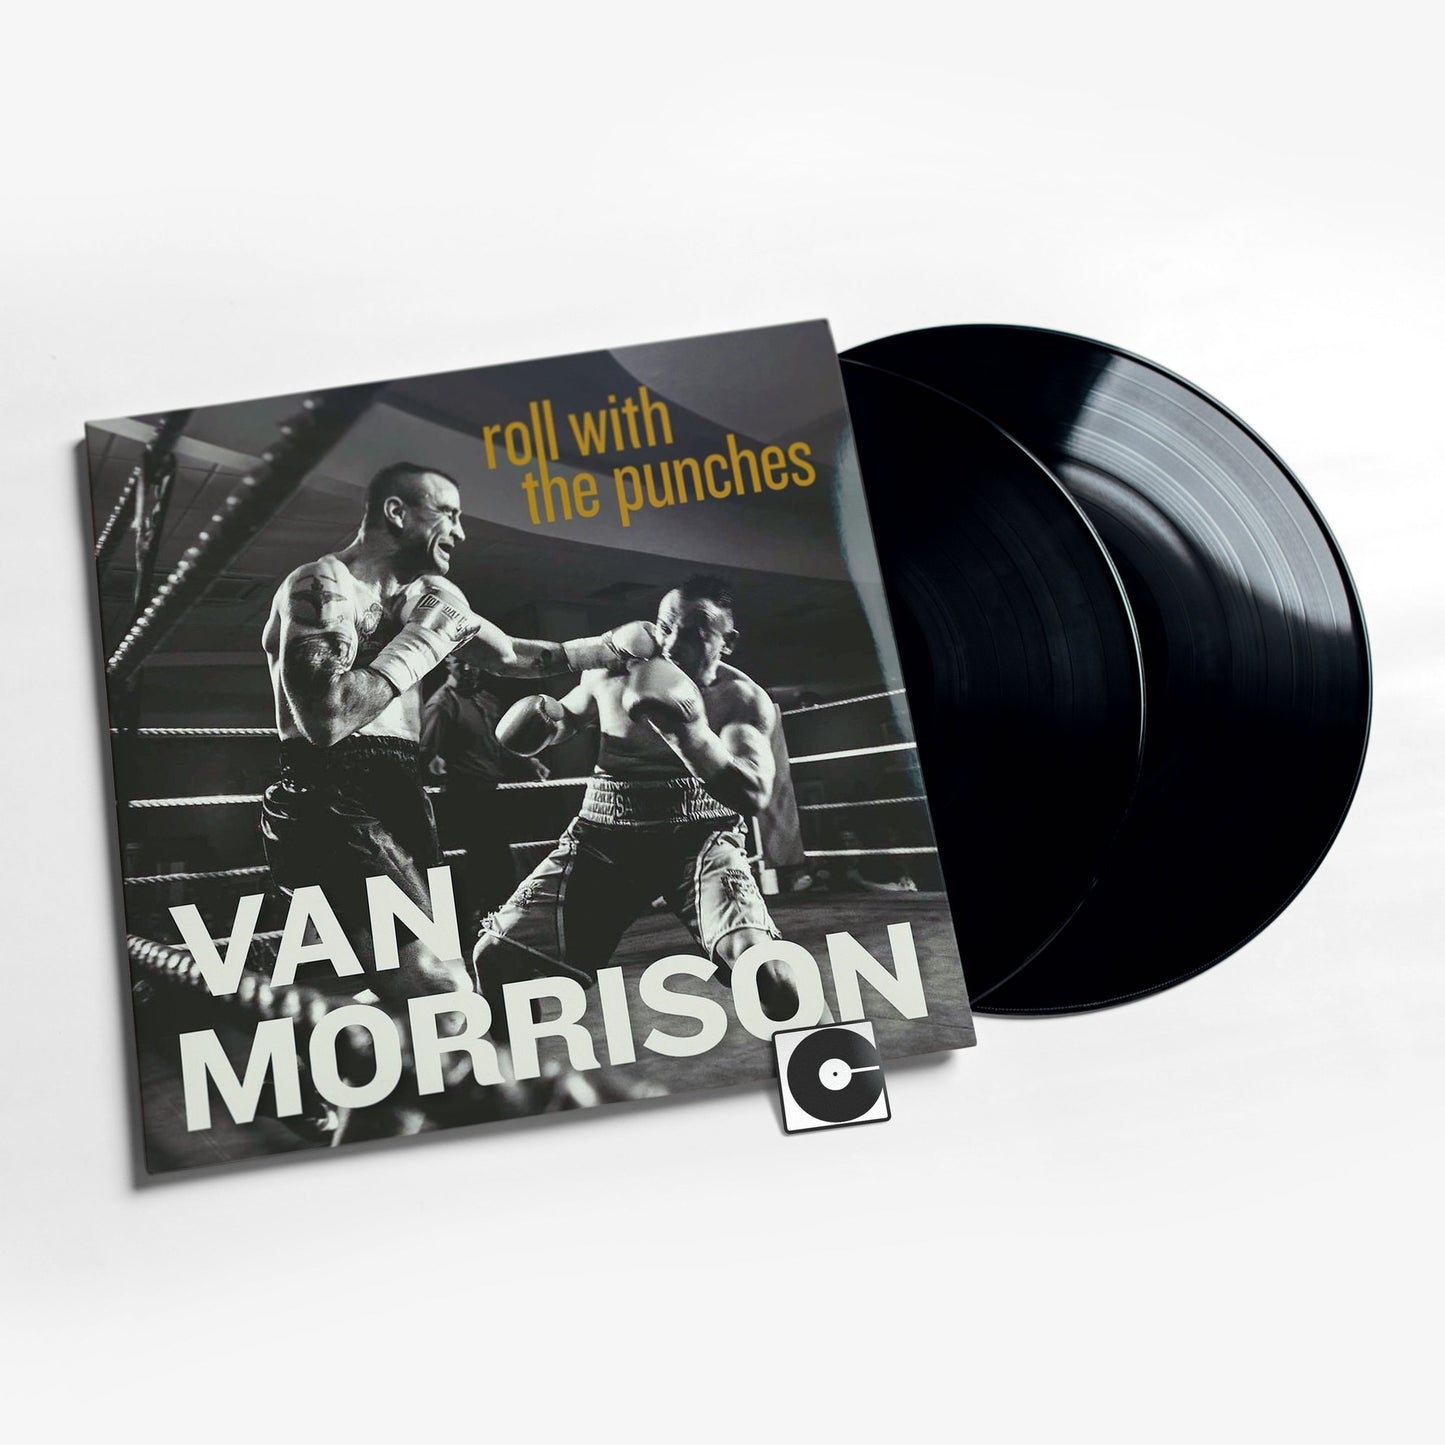 Van Morrison - "Roll With The Punches"